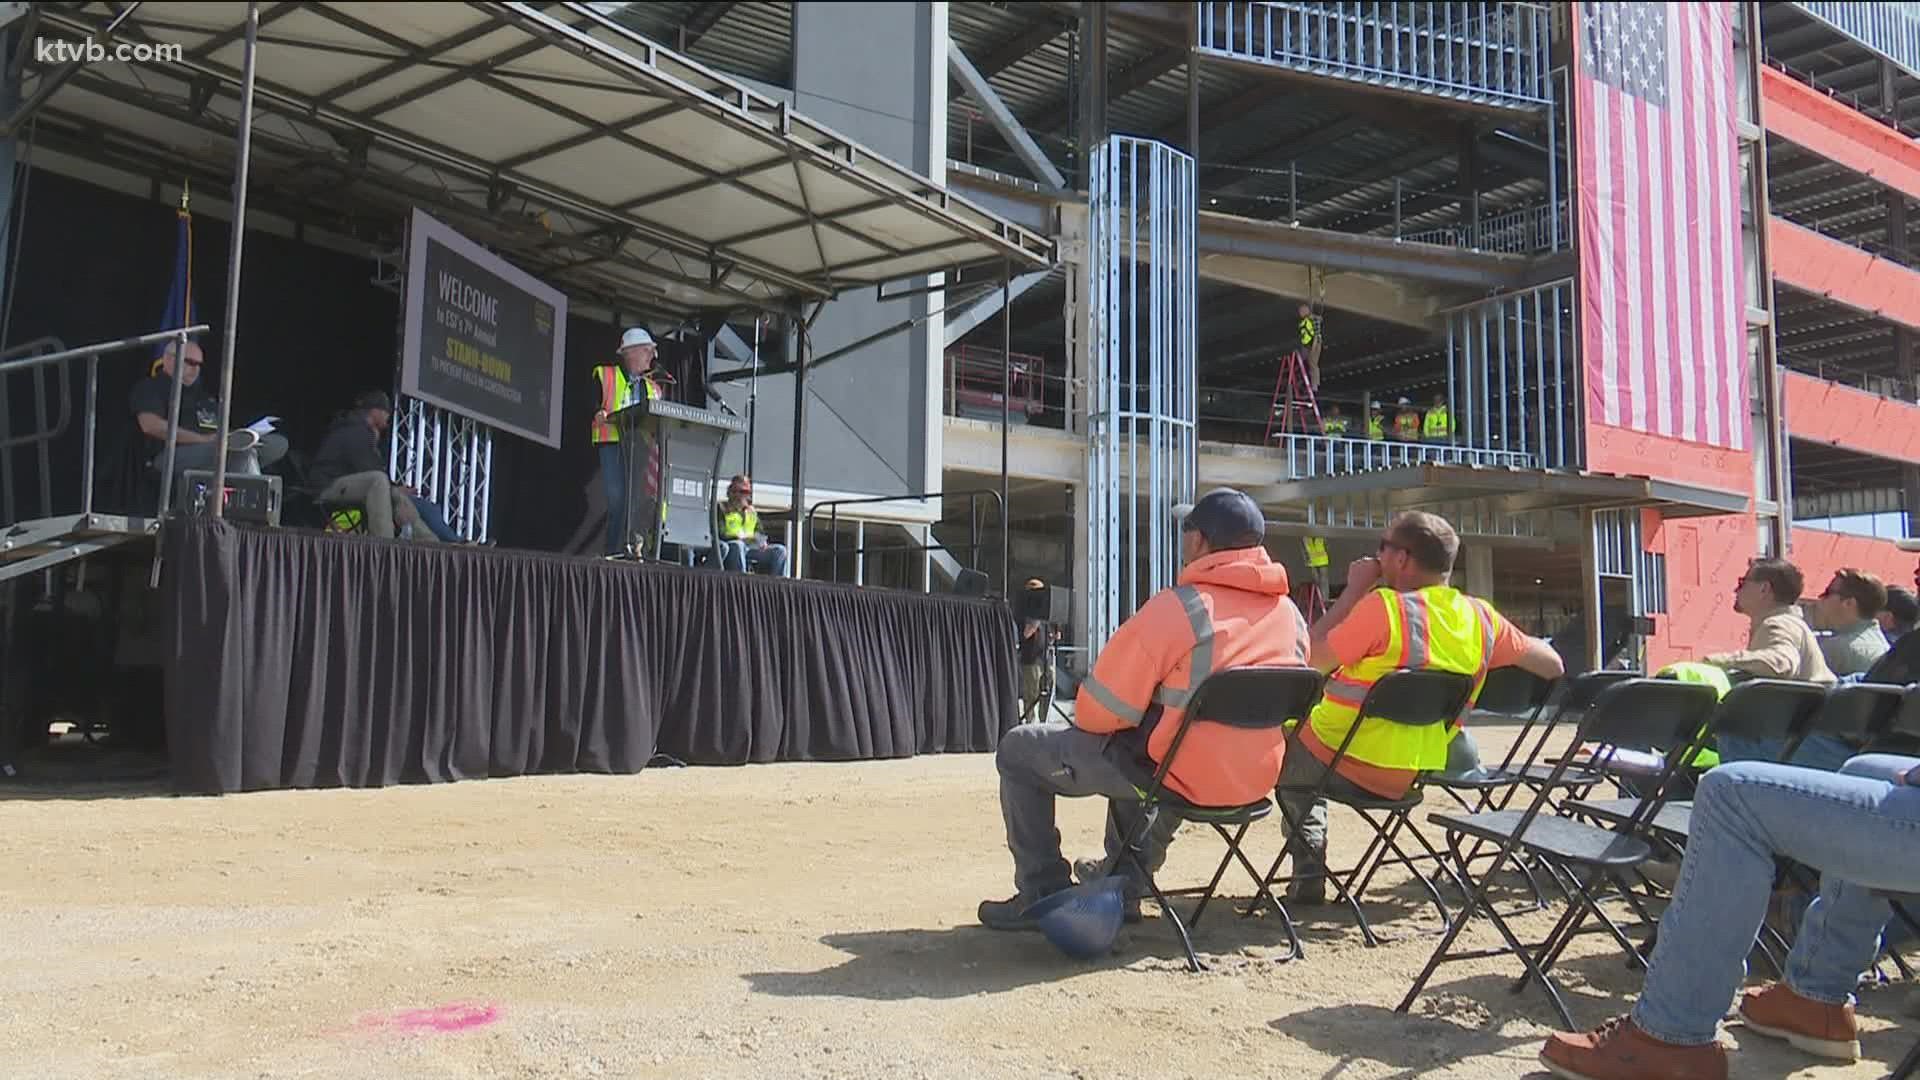 ESI is participating in OHSA's National Safety Stand Down Week by hosting a demonstration for 500 construction workers about safety protocols to prevent falls.